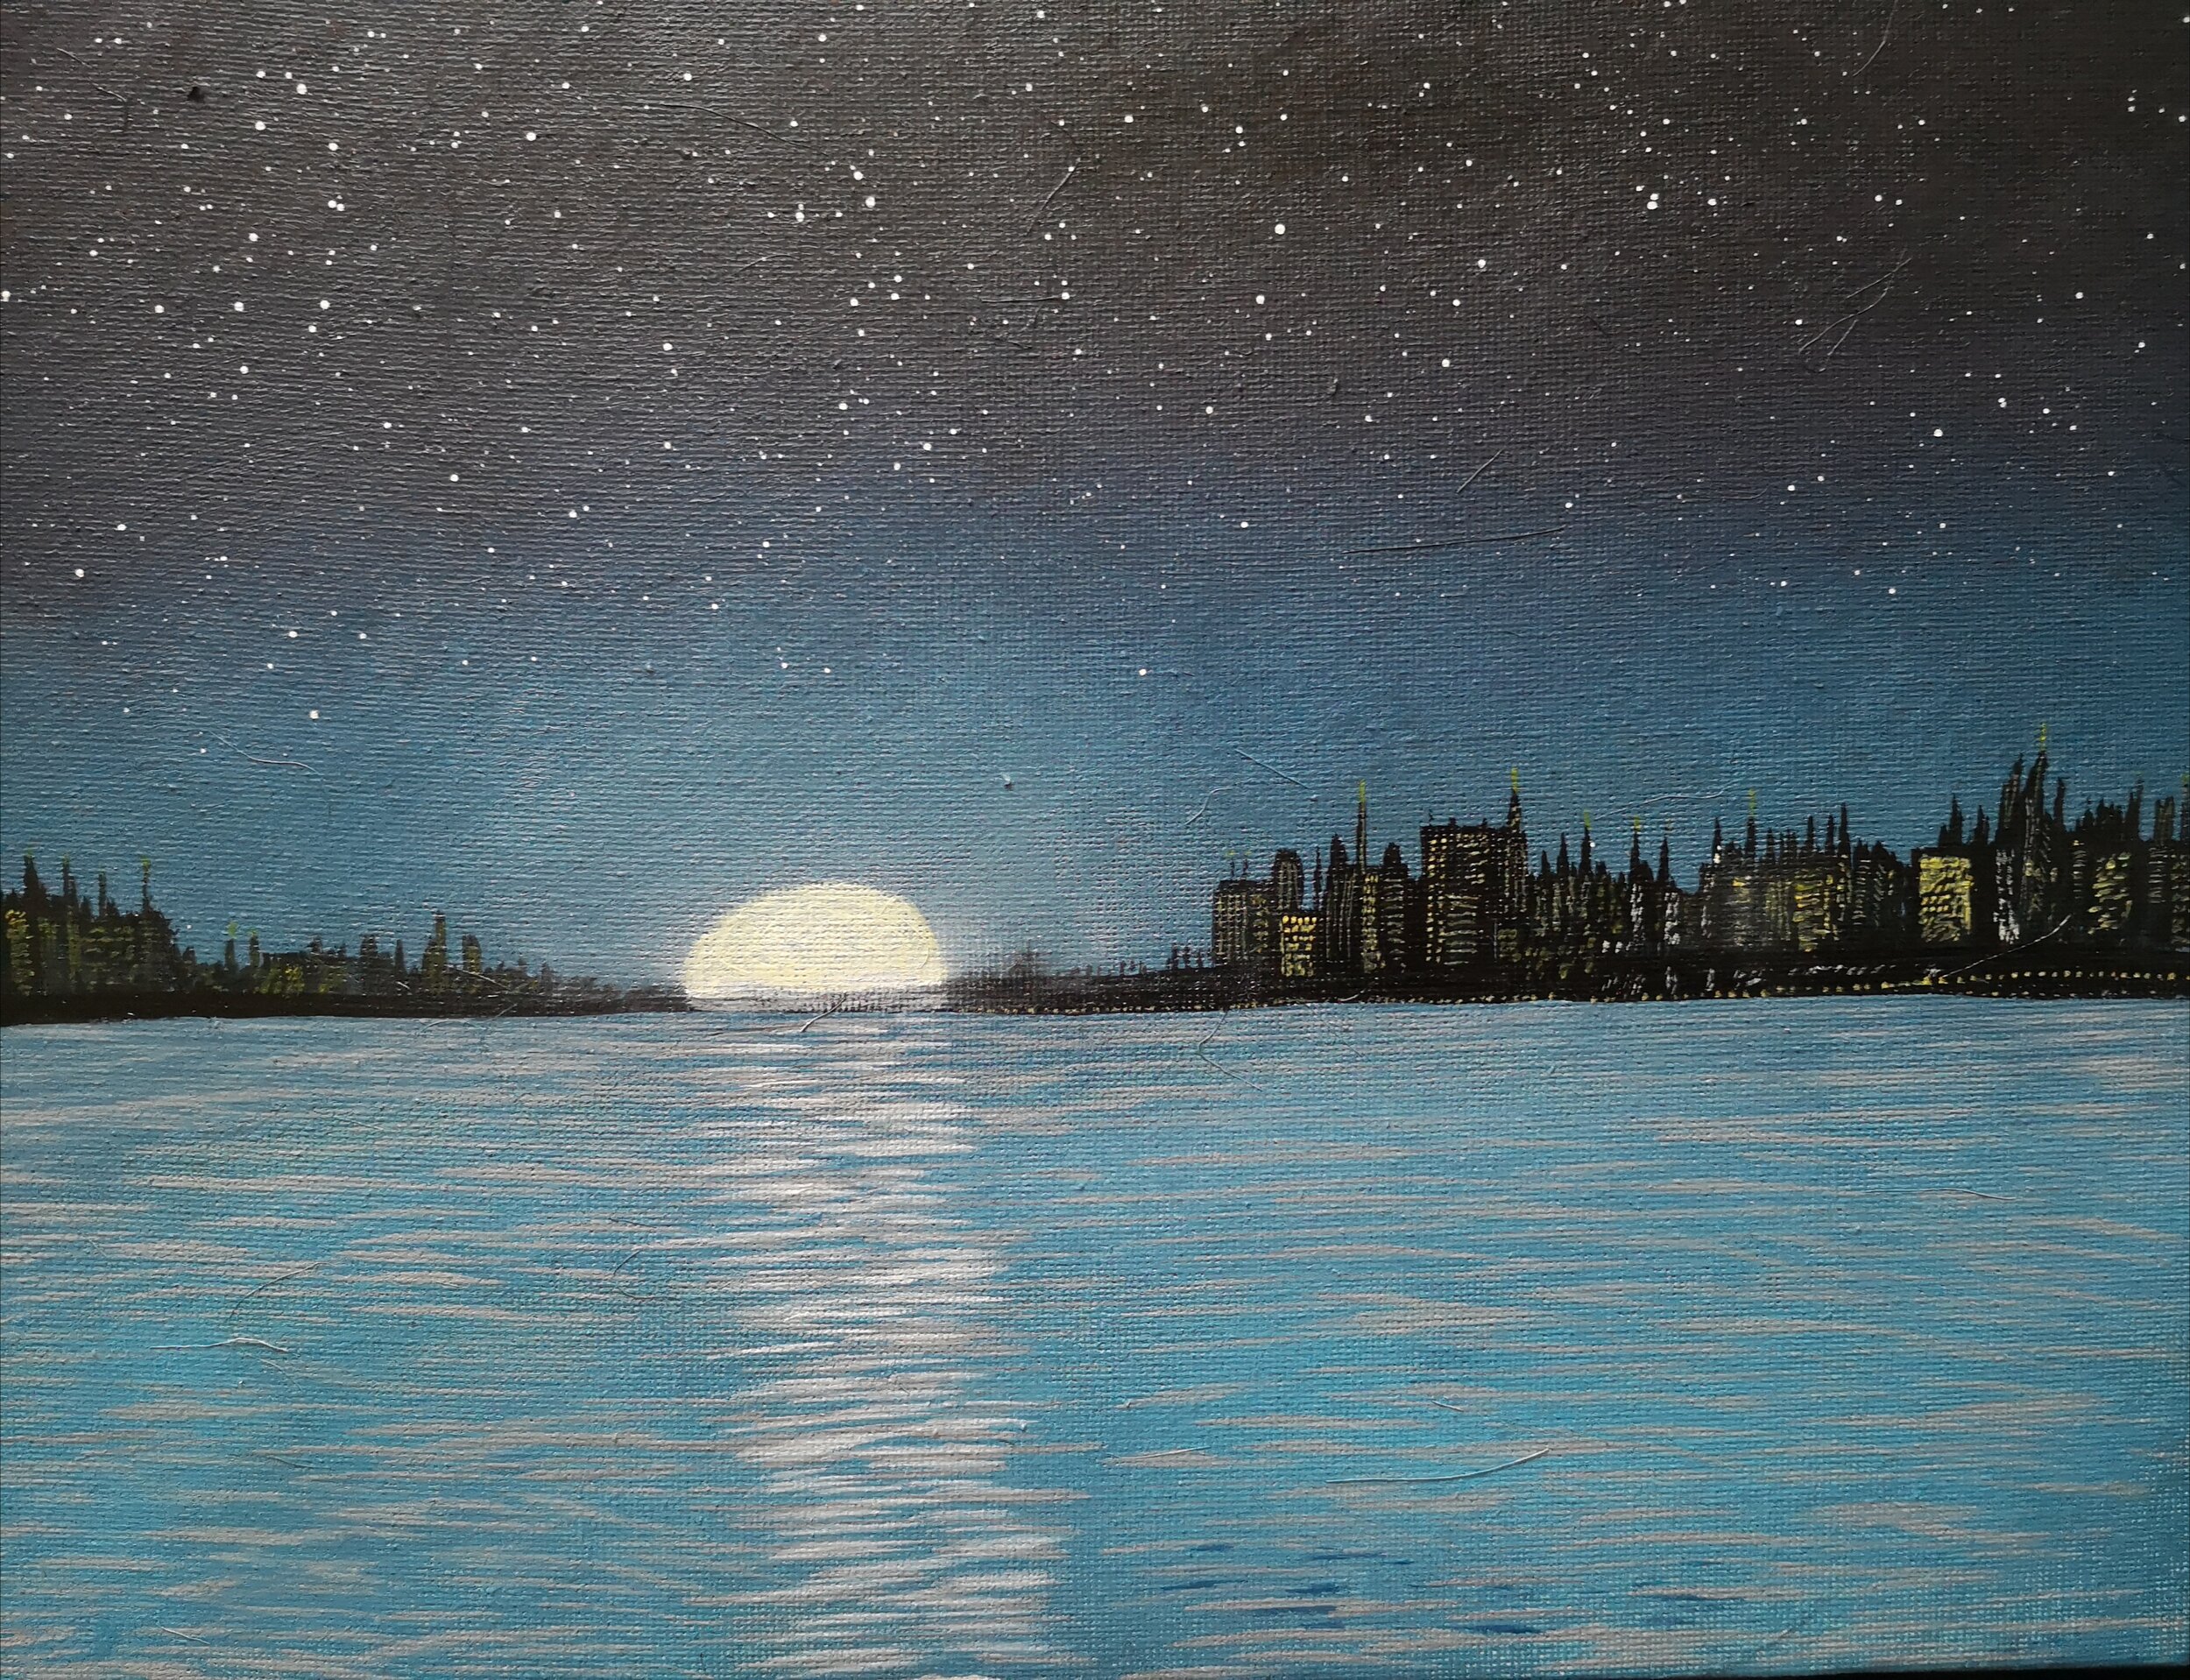 Moonrise over the city - original acrylic on canvas nightscape